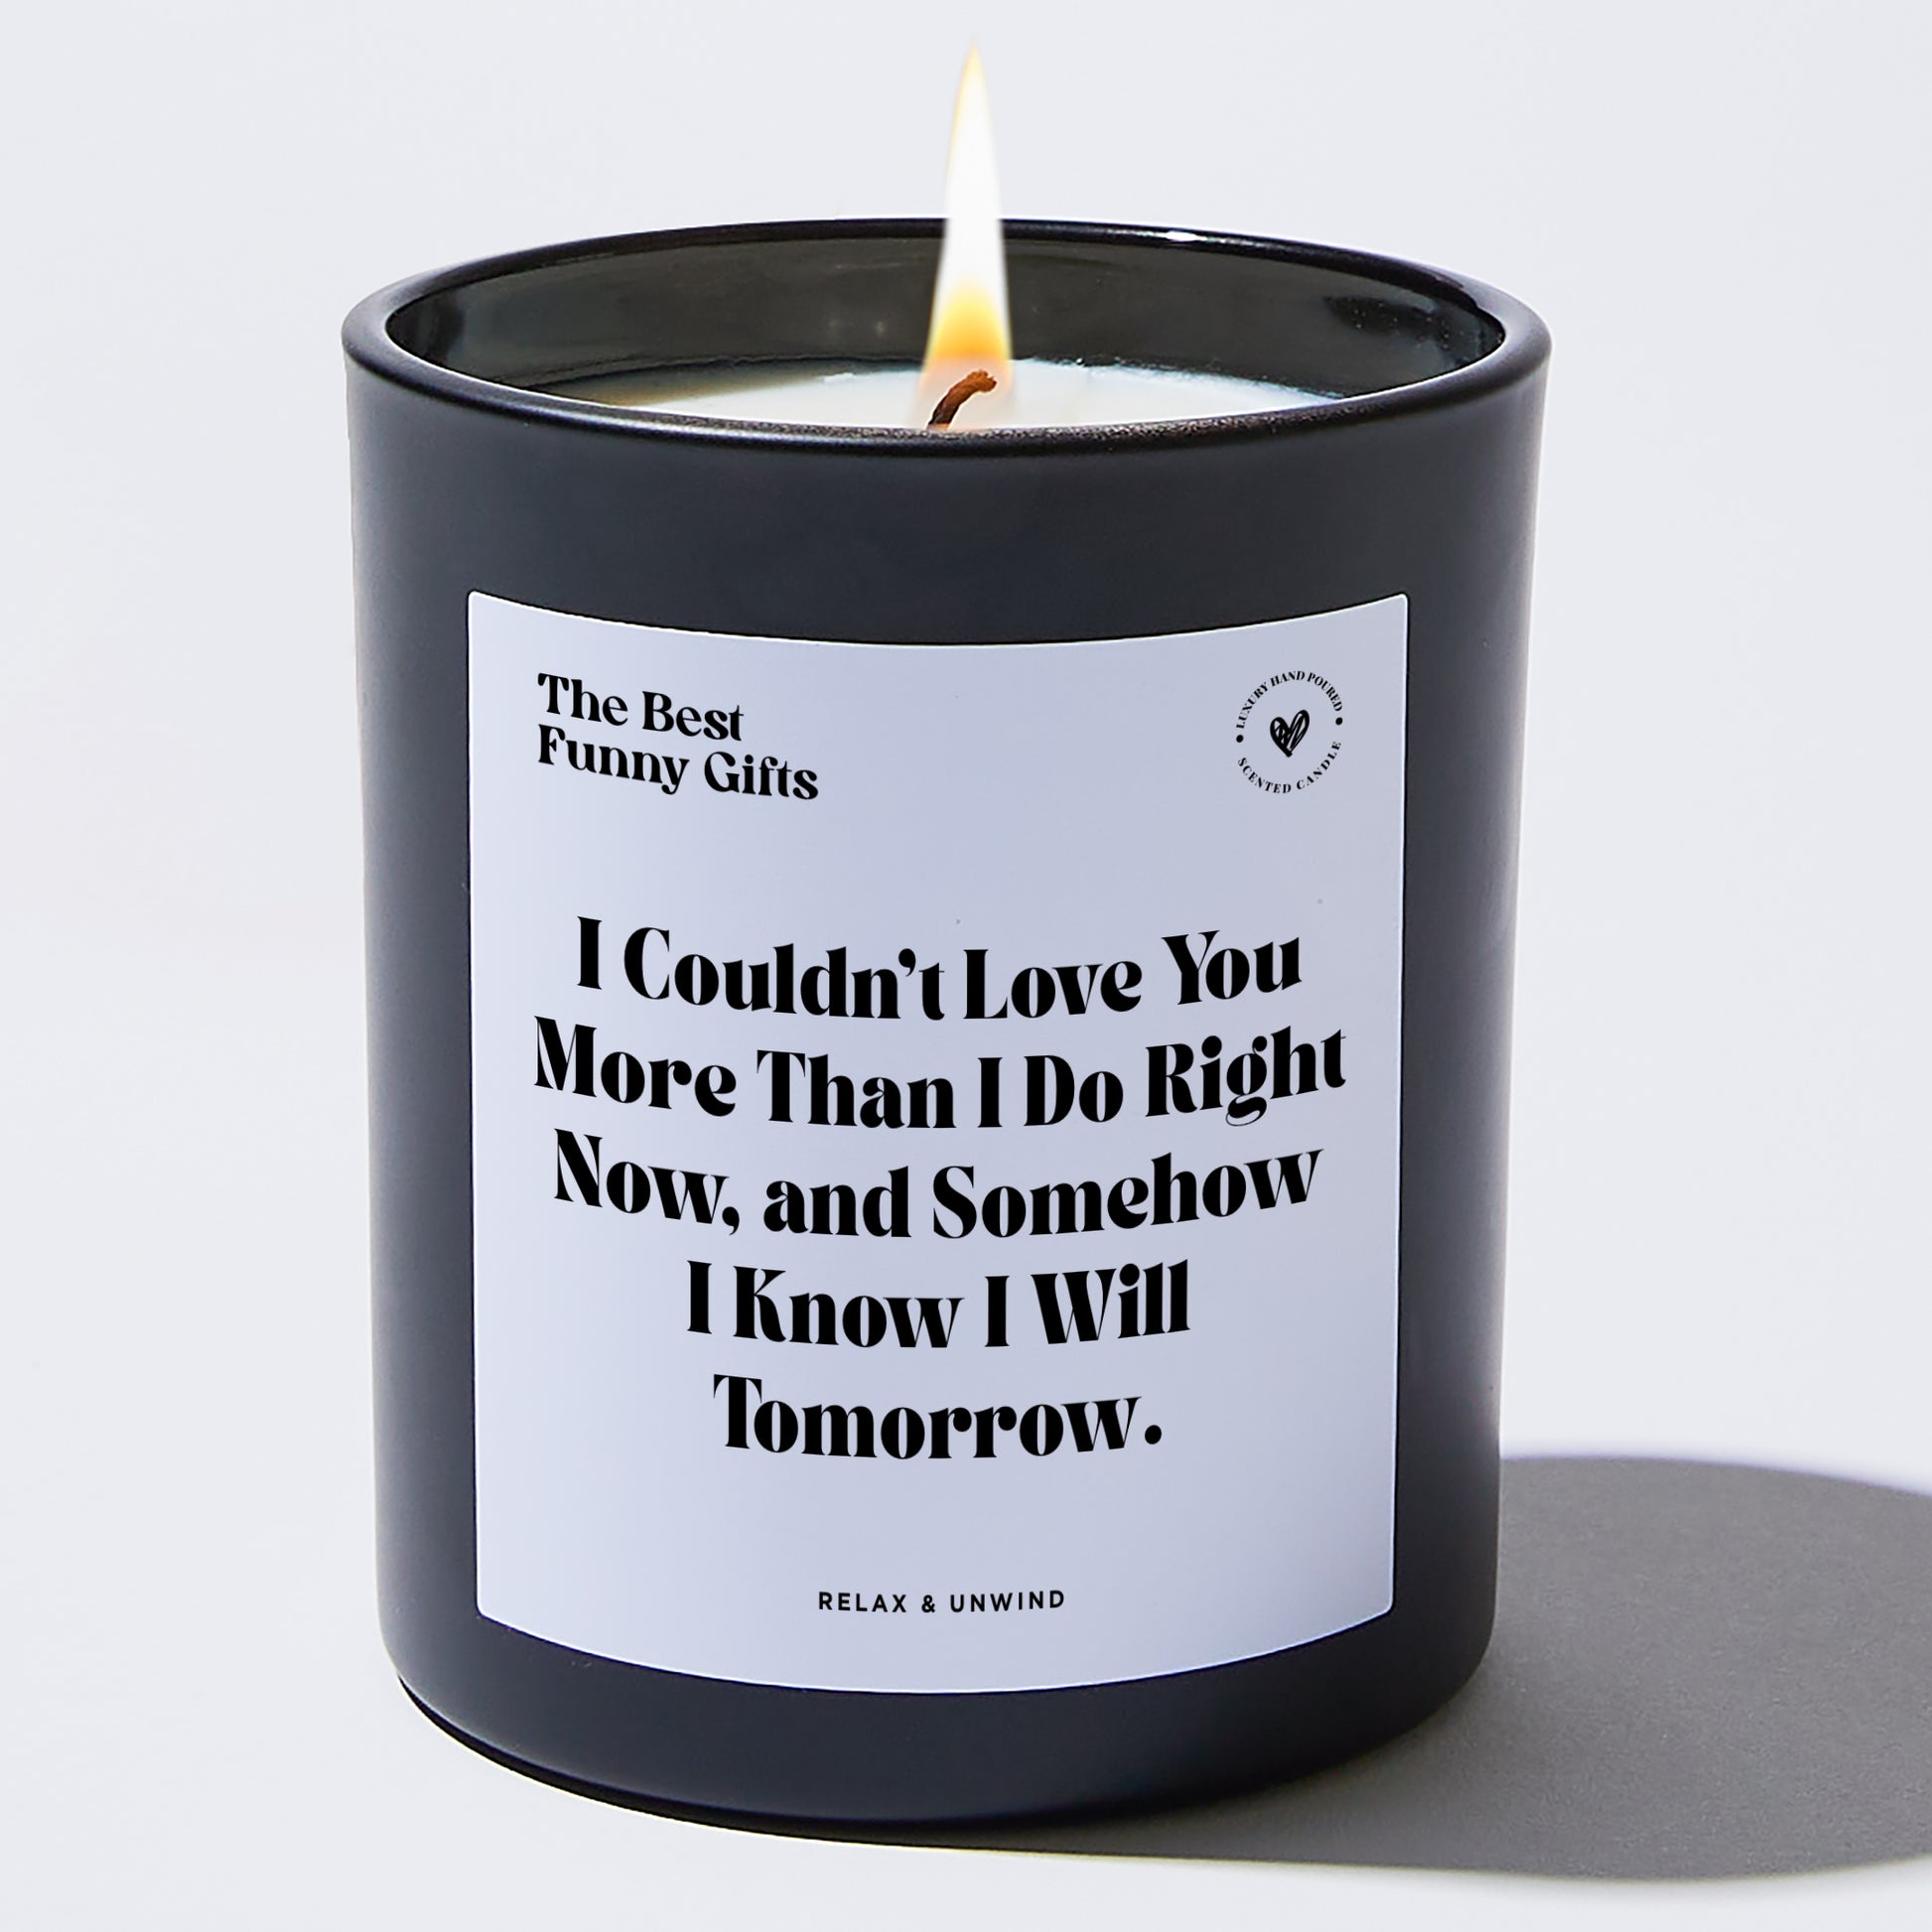 Anniversary I Couldn't Love You More Than I Do Right Now, and Somehow I Know I Will Tomorrow. - The Best Funny Gifts